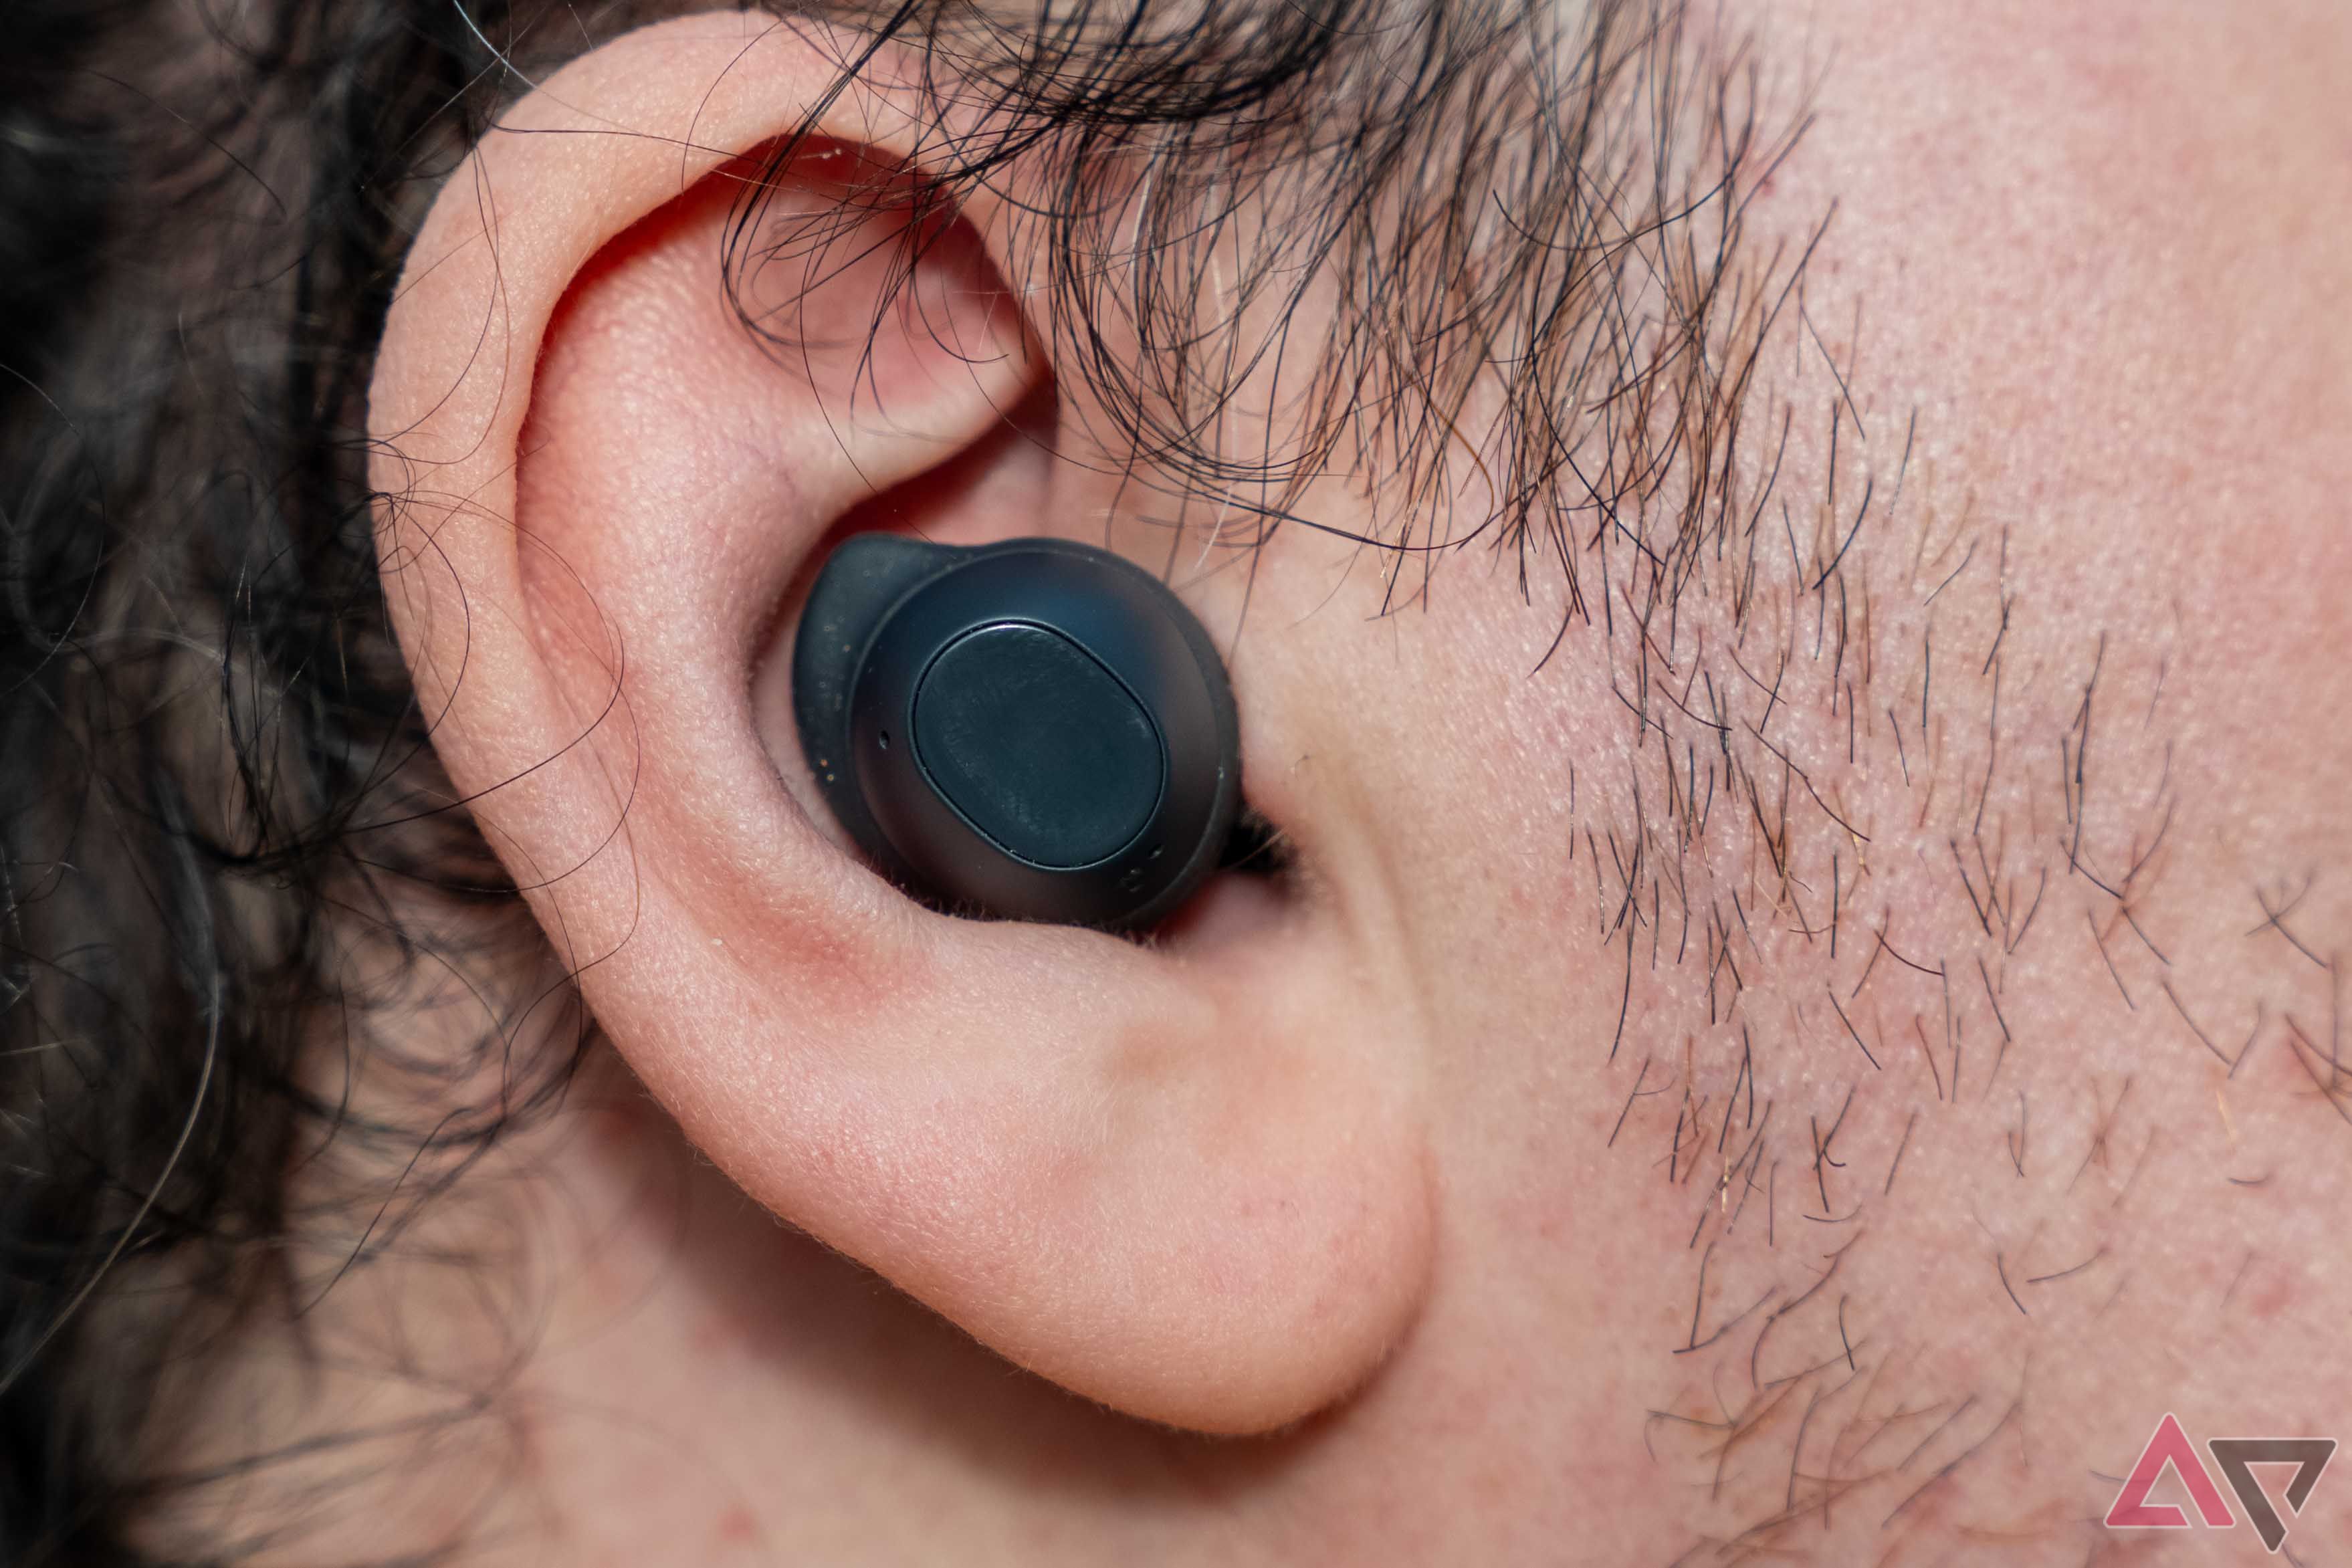 Samsung Galaxy Buds FE review: Maybe just for the fans